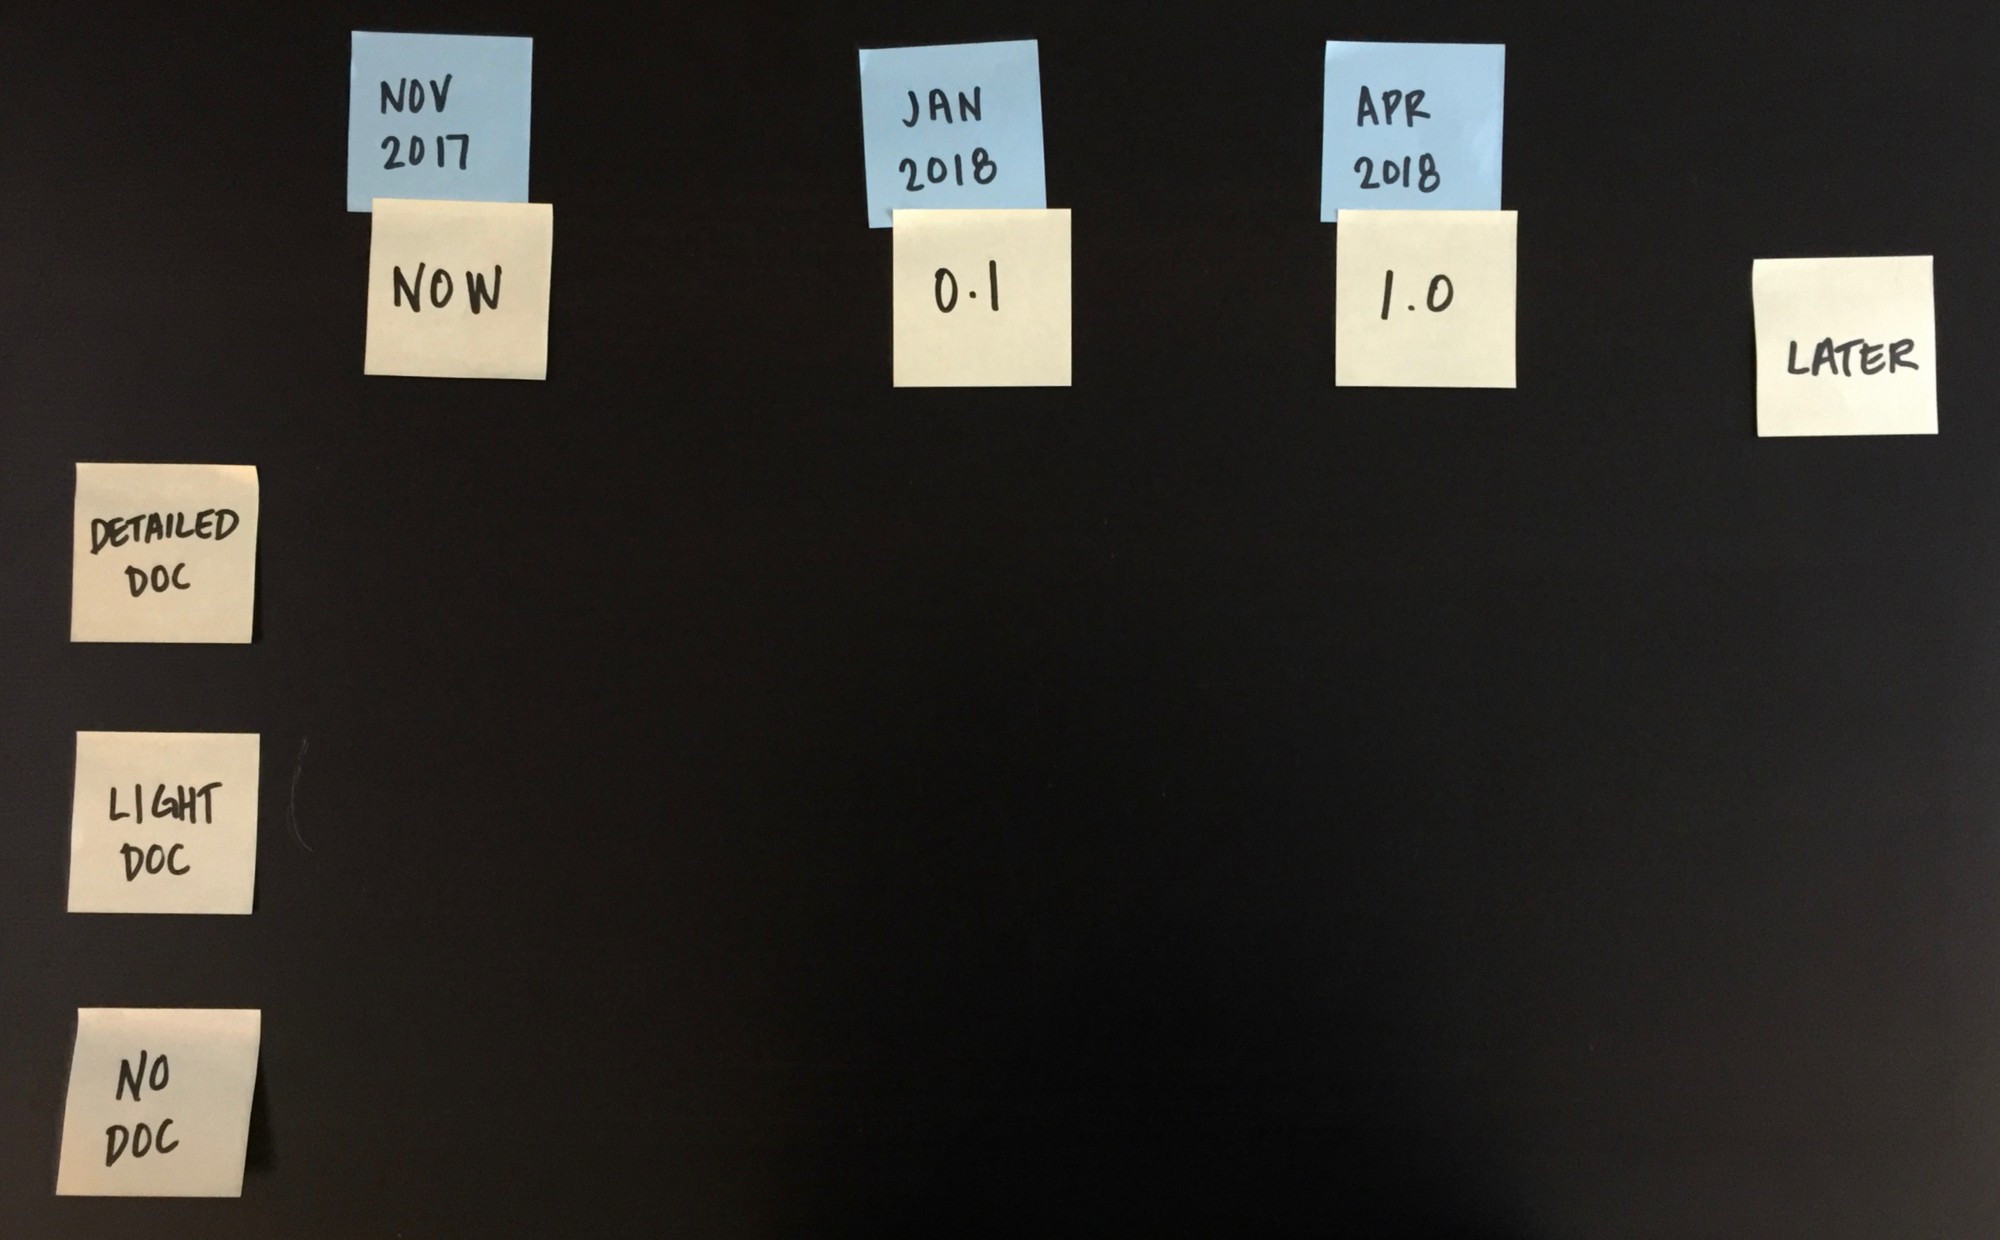 Photo of post it notes arranged to create a grid of milestones versus documentation detail levels